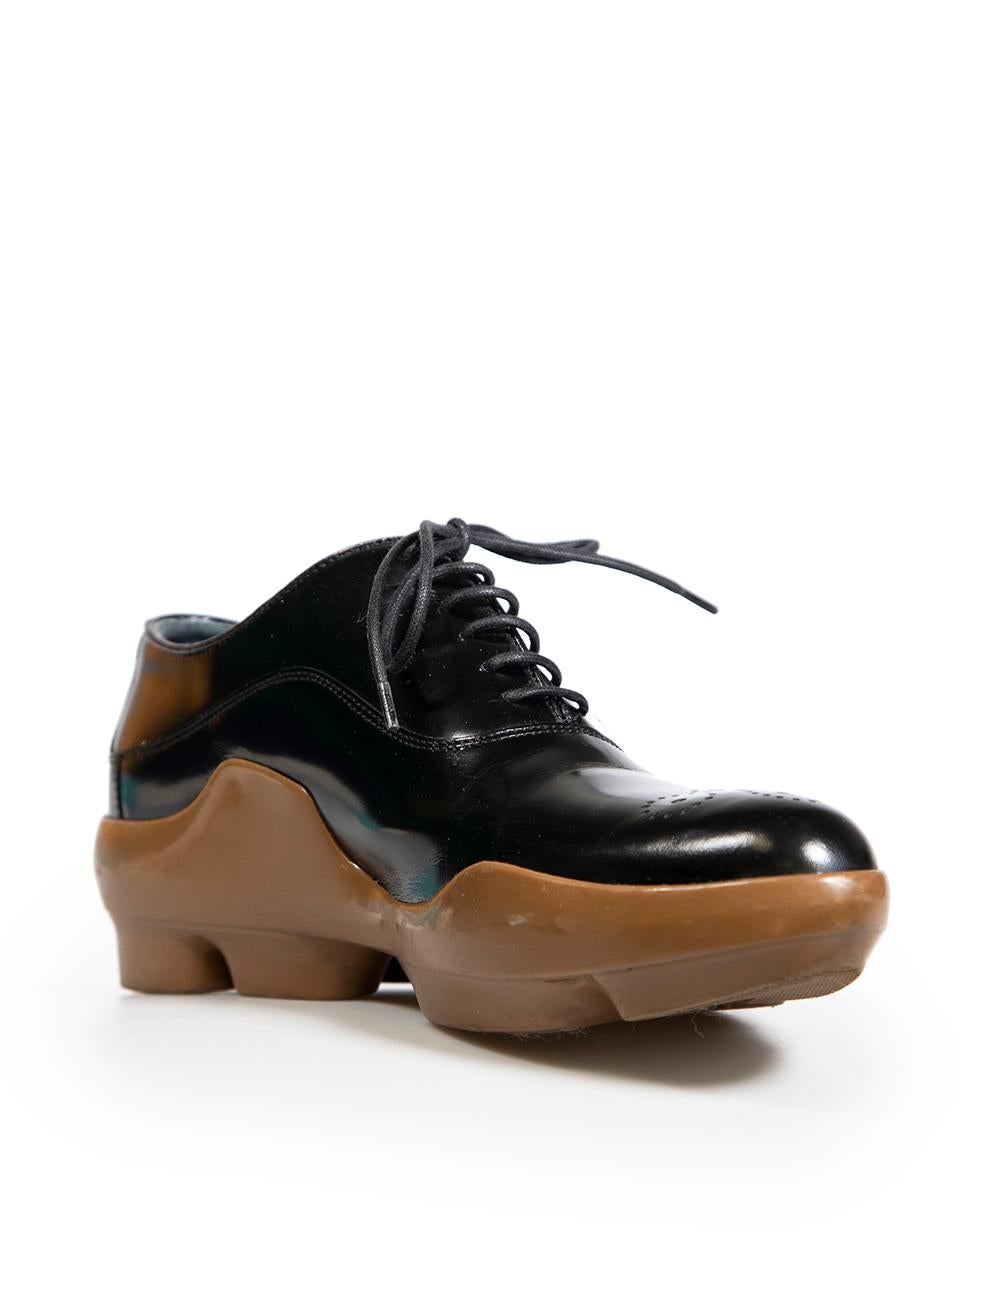 CONDITION is Very good. Minimal wear to shoes is evident. Minimal wear to both outsoles with light scratches. There is also general creasing to the leather on this used Prada designer resale item.
 
 Details
 Derby
 Black
 Leather
 Oxfords
 Contrast